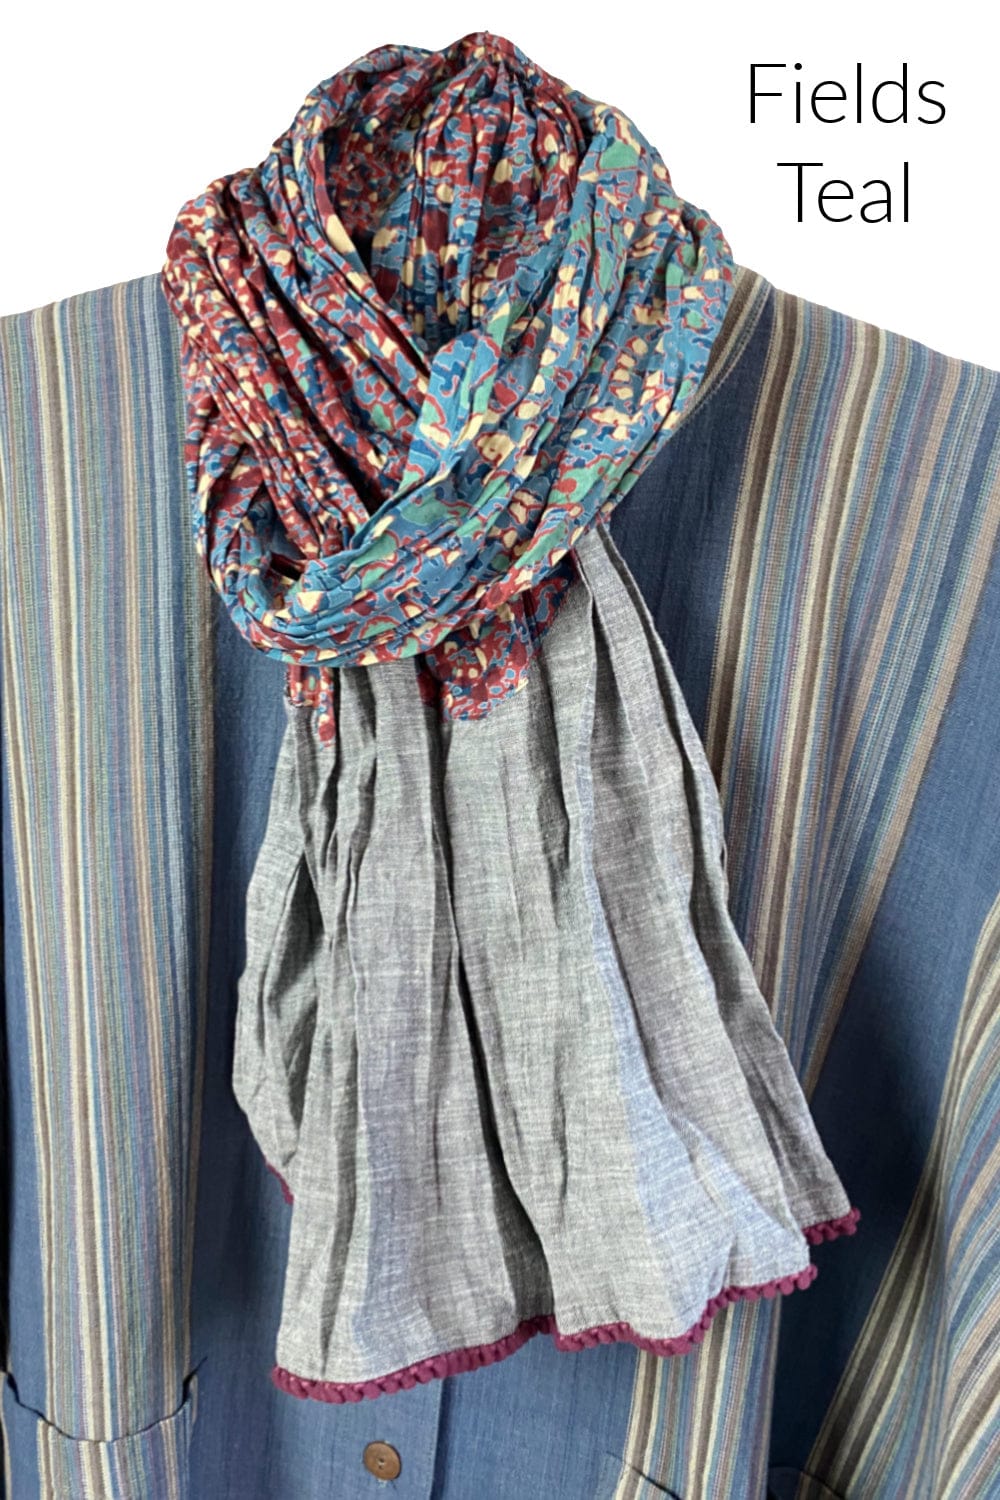 Pretty cotton scarf with a scattered print and grey accent. Edges are trimmed little textured trim.